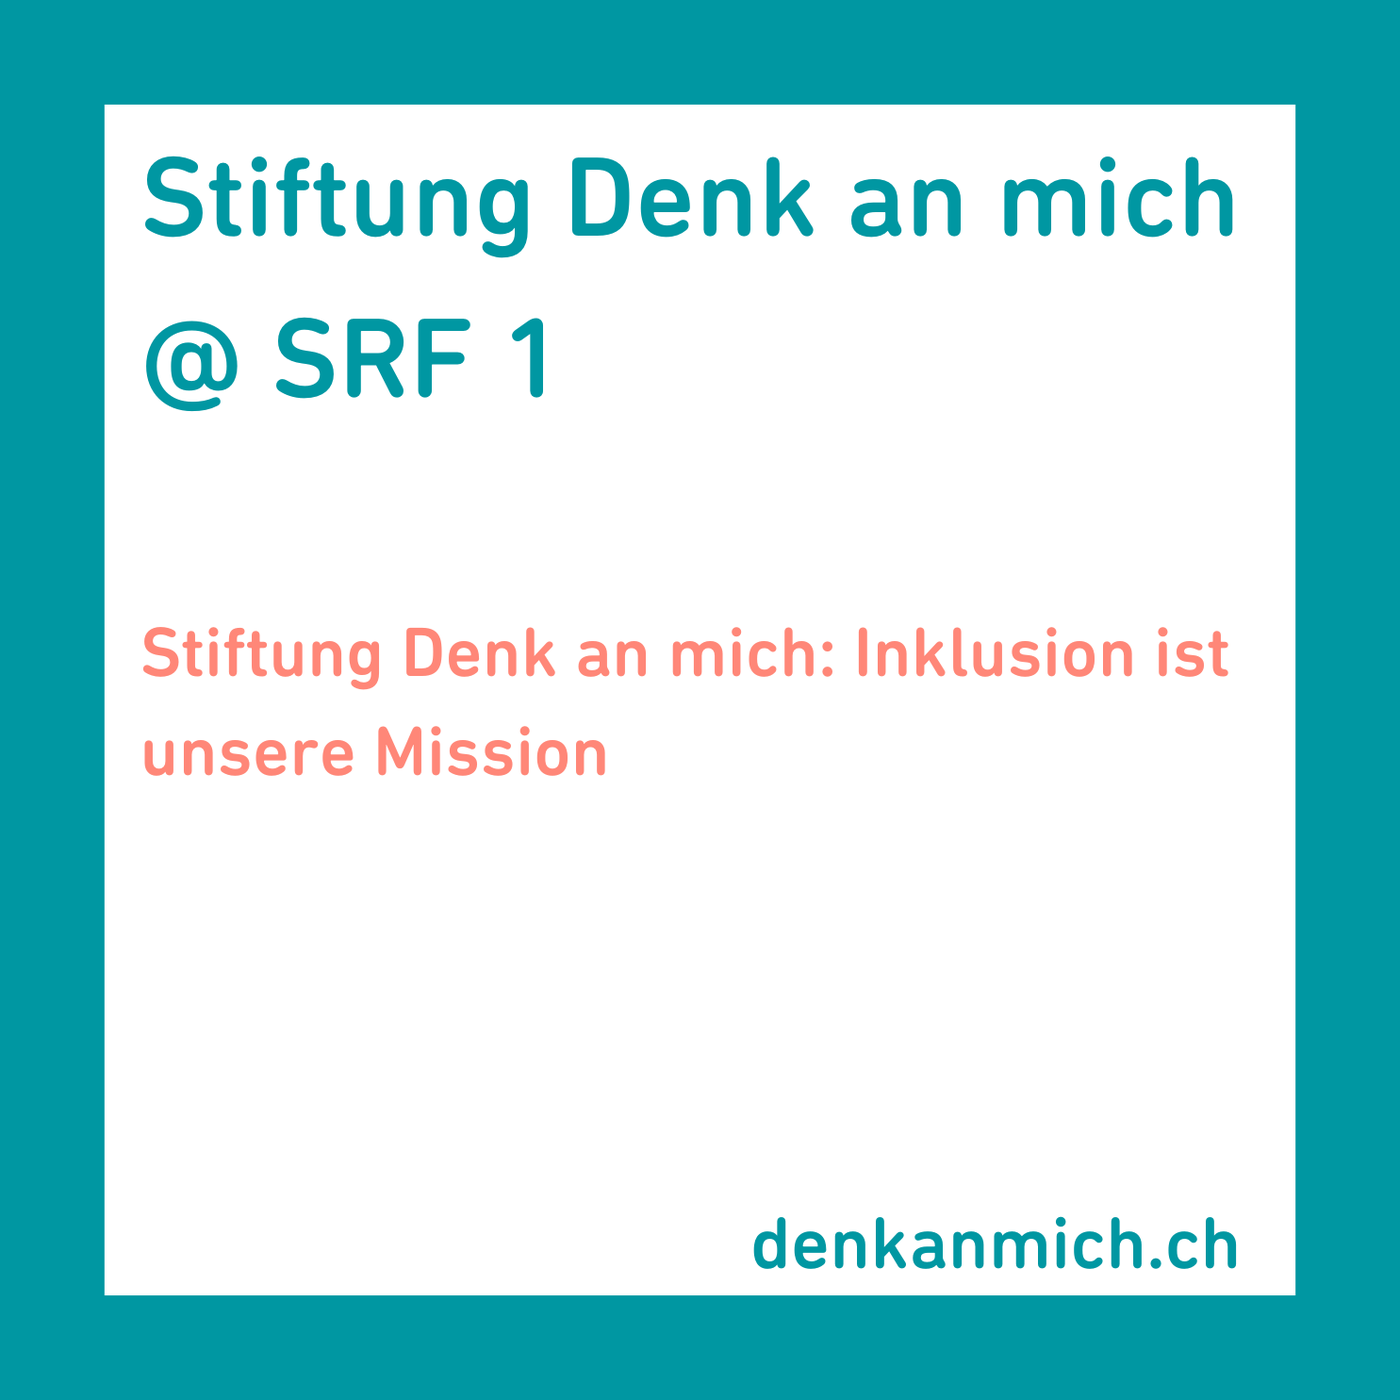 Stiftung Denk an mich: Inklusion ist unsere Mission